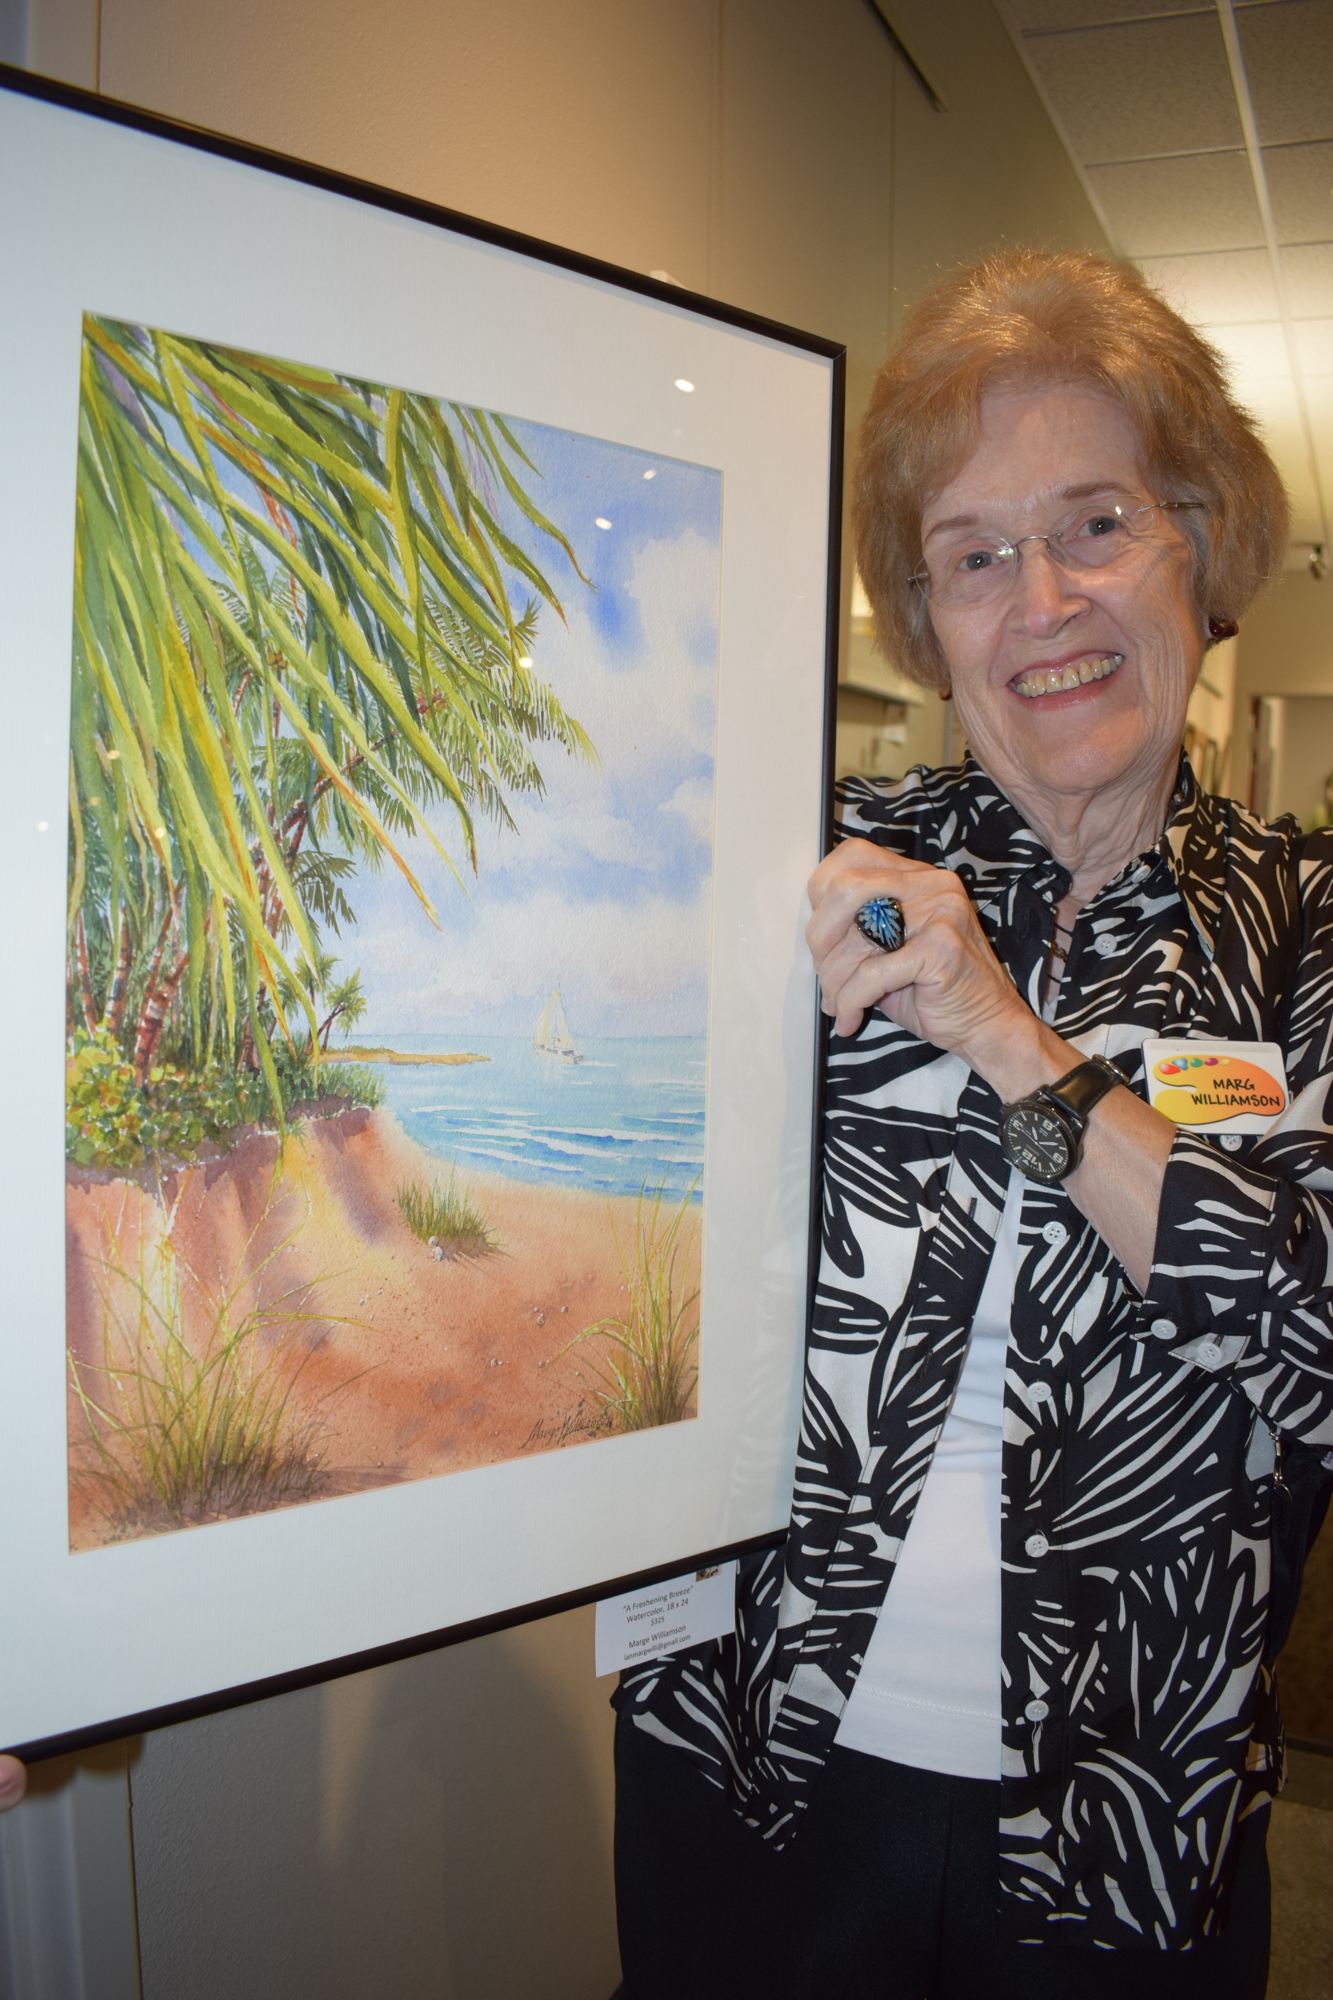 Creekside's Marg Williamson started painting after she retired in 1998. She said the ComCenter is a good showcase for her work.